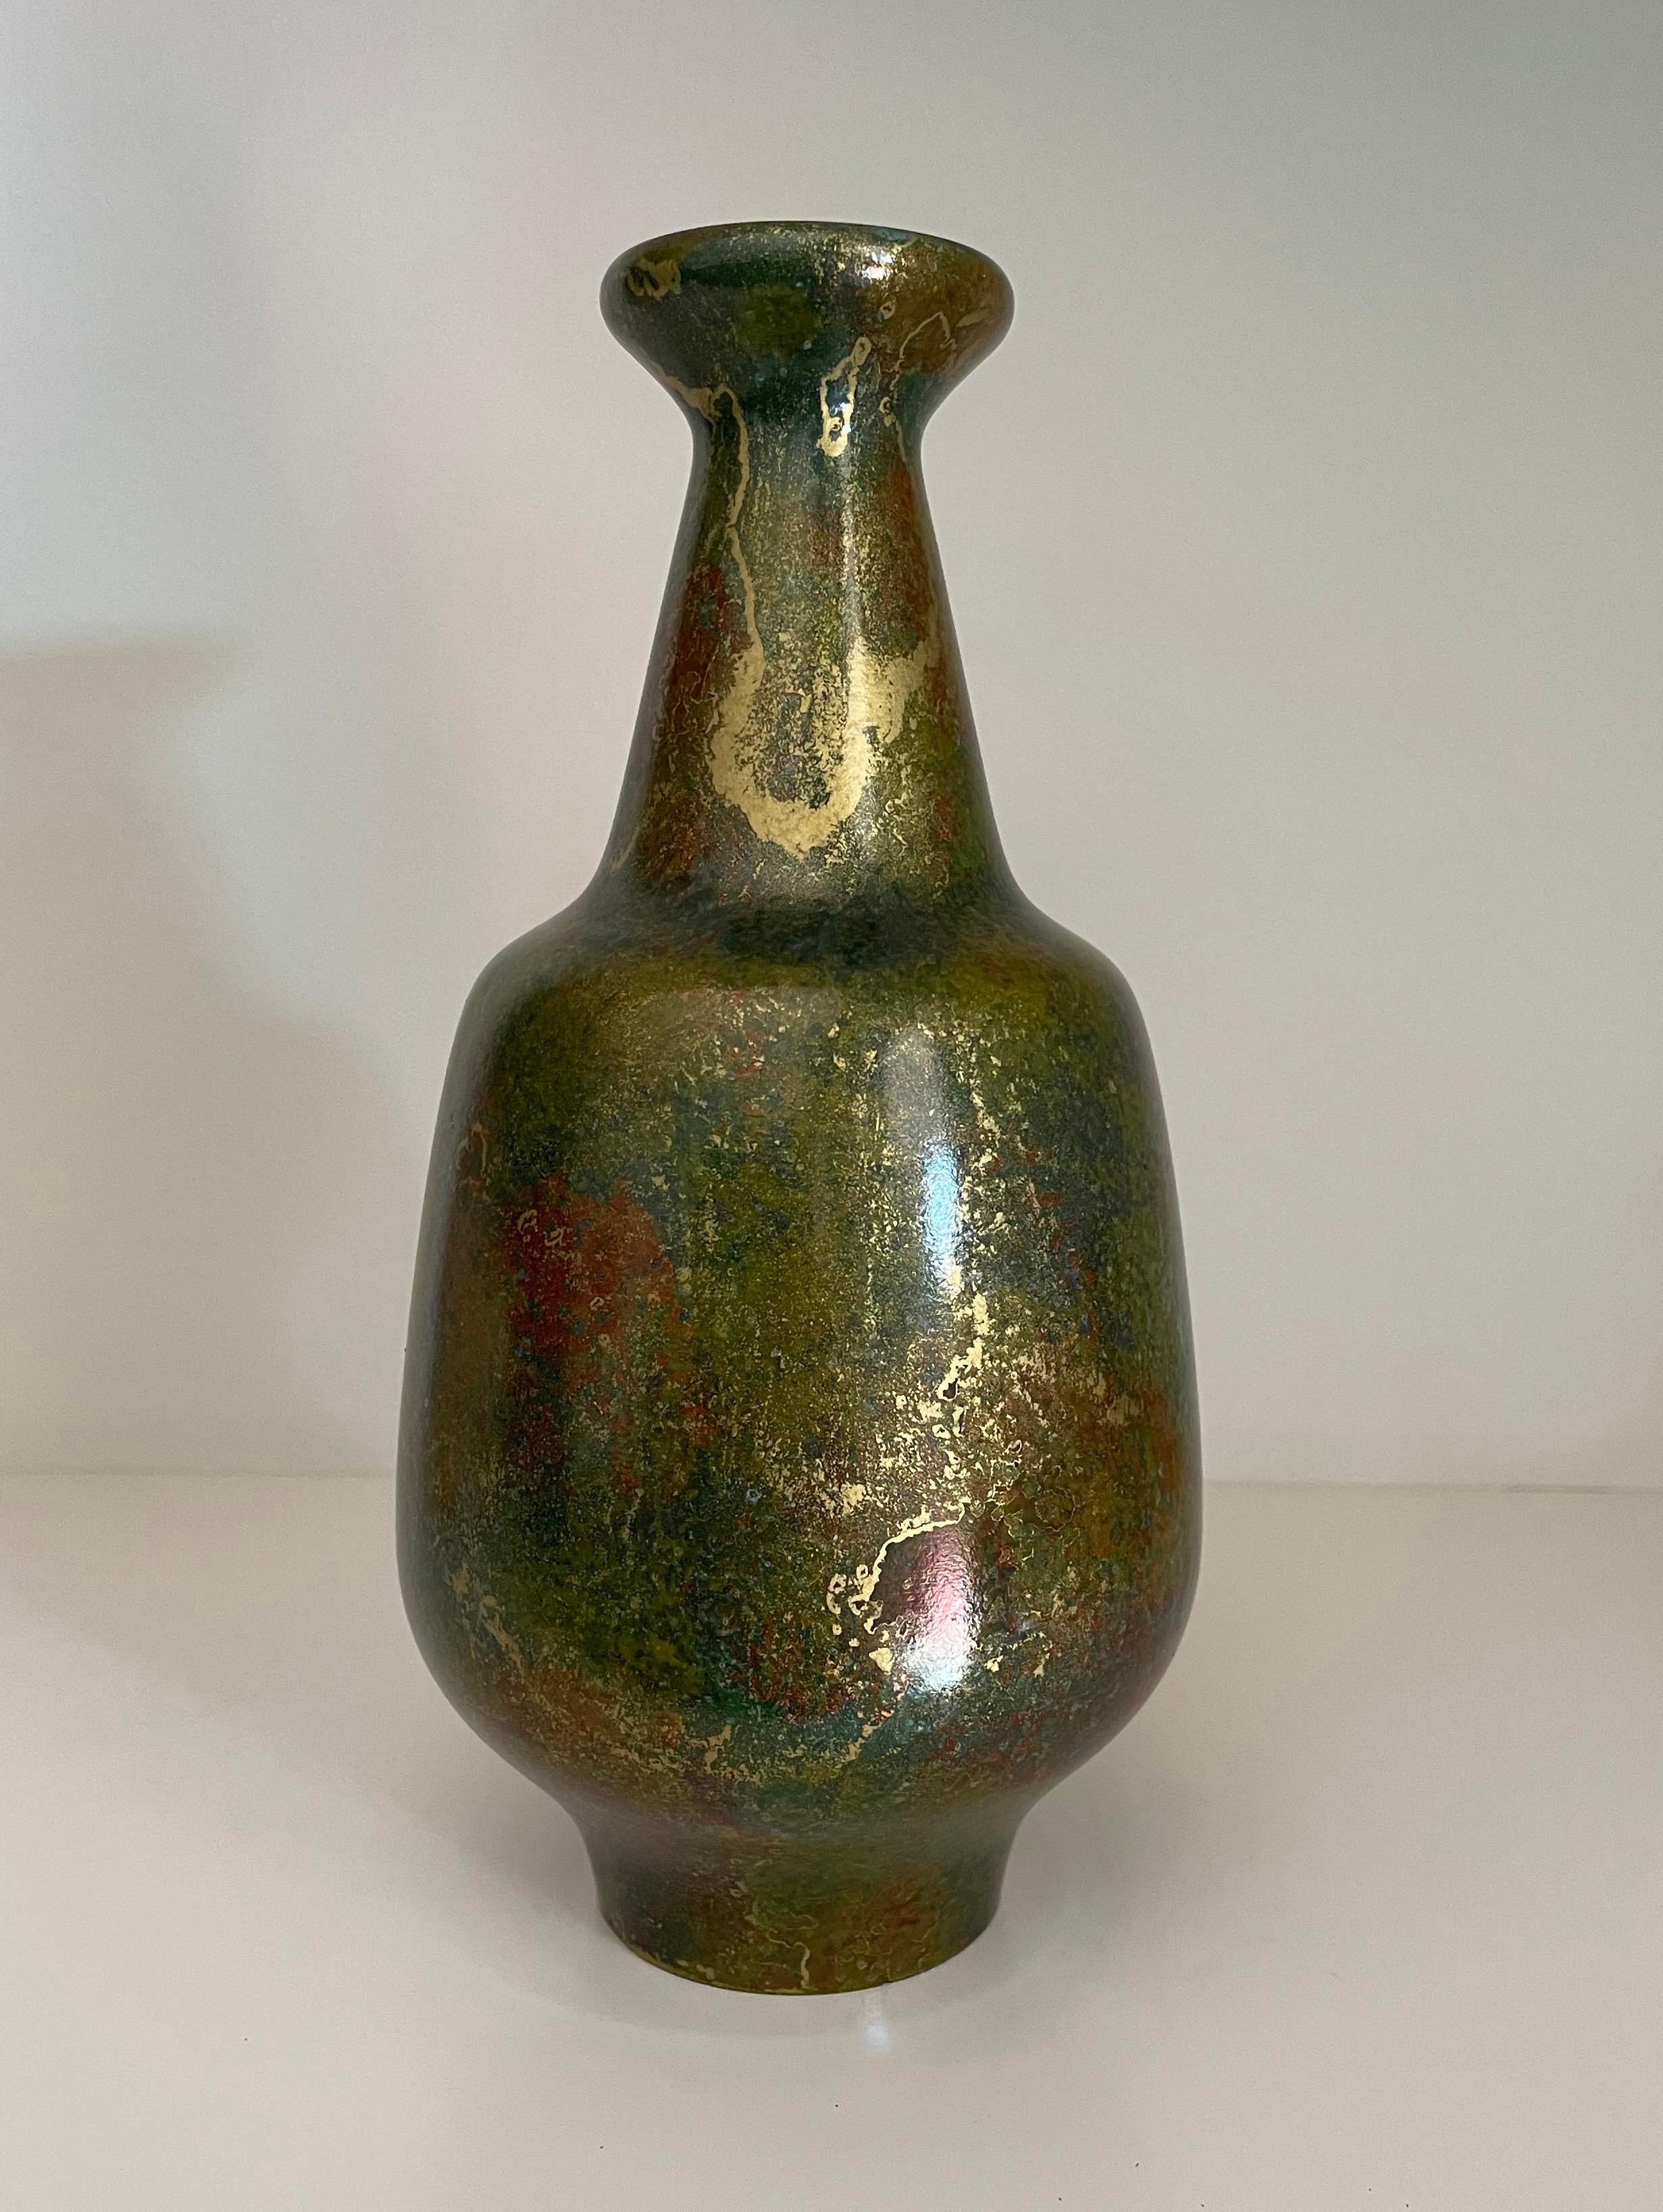 Japanese Bronze Vase, Signed, with Gold, Red and Green Patination, 20th Century In Good Condition For Sale In Melbourne, Victoria